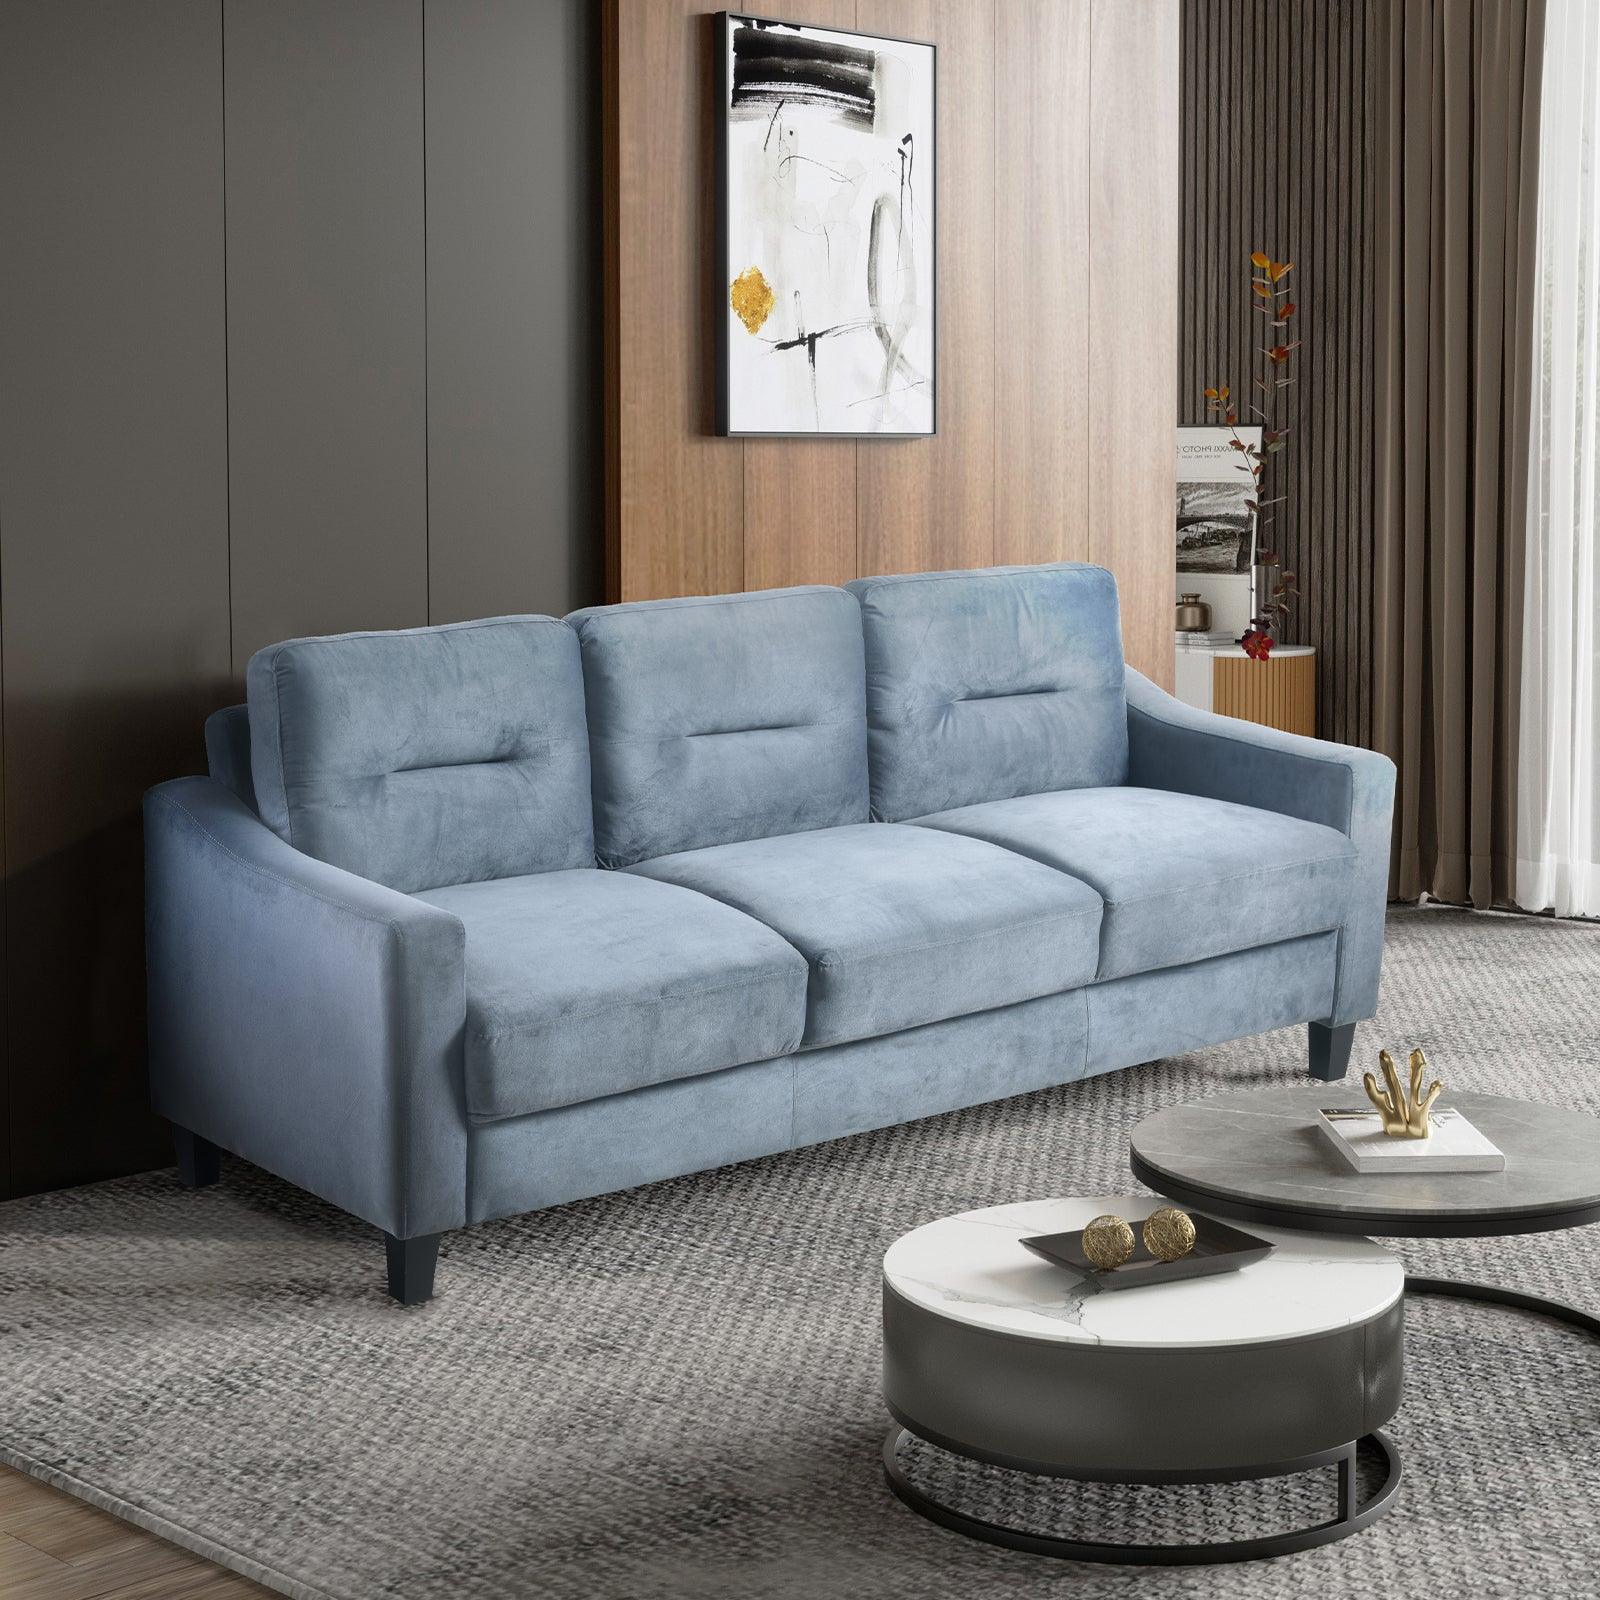 🆓🚛 77" 3 Seater Chenille Fabric Sofa for Living Room, Blue/Gray